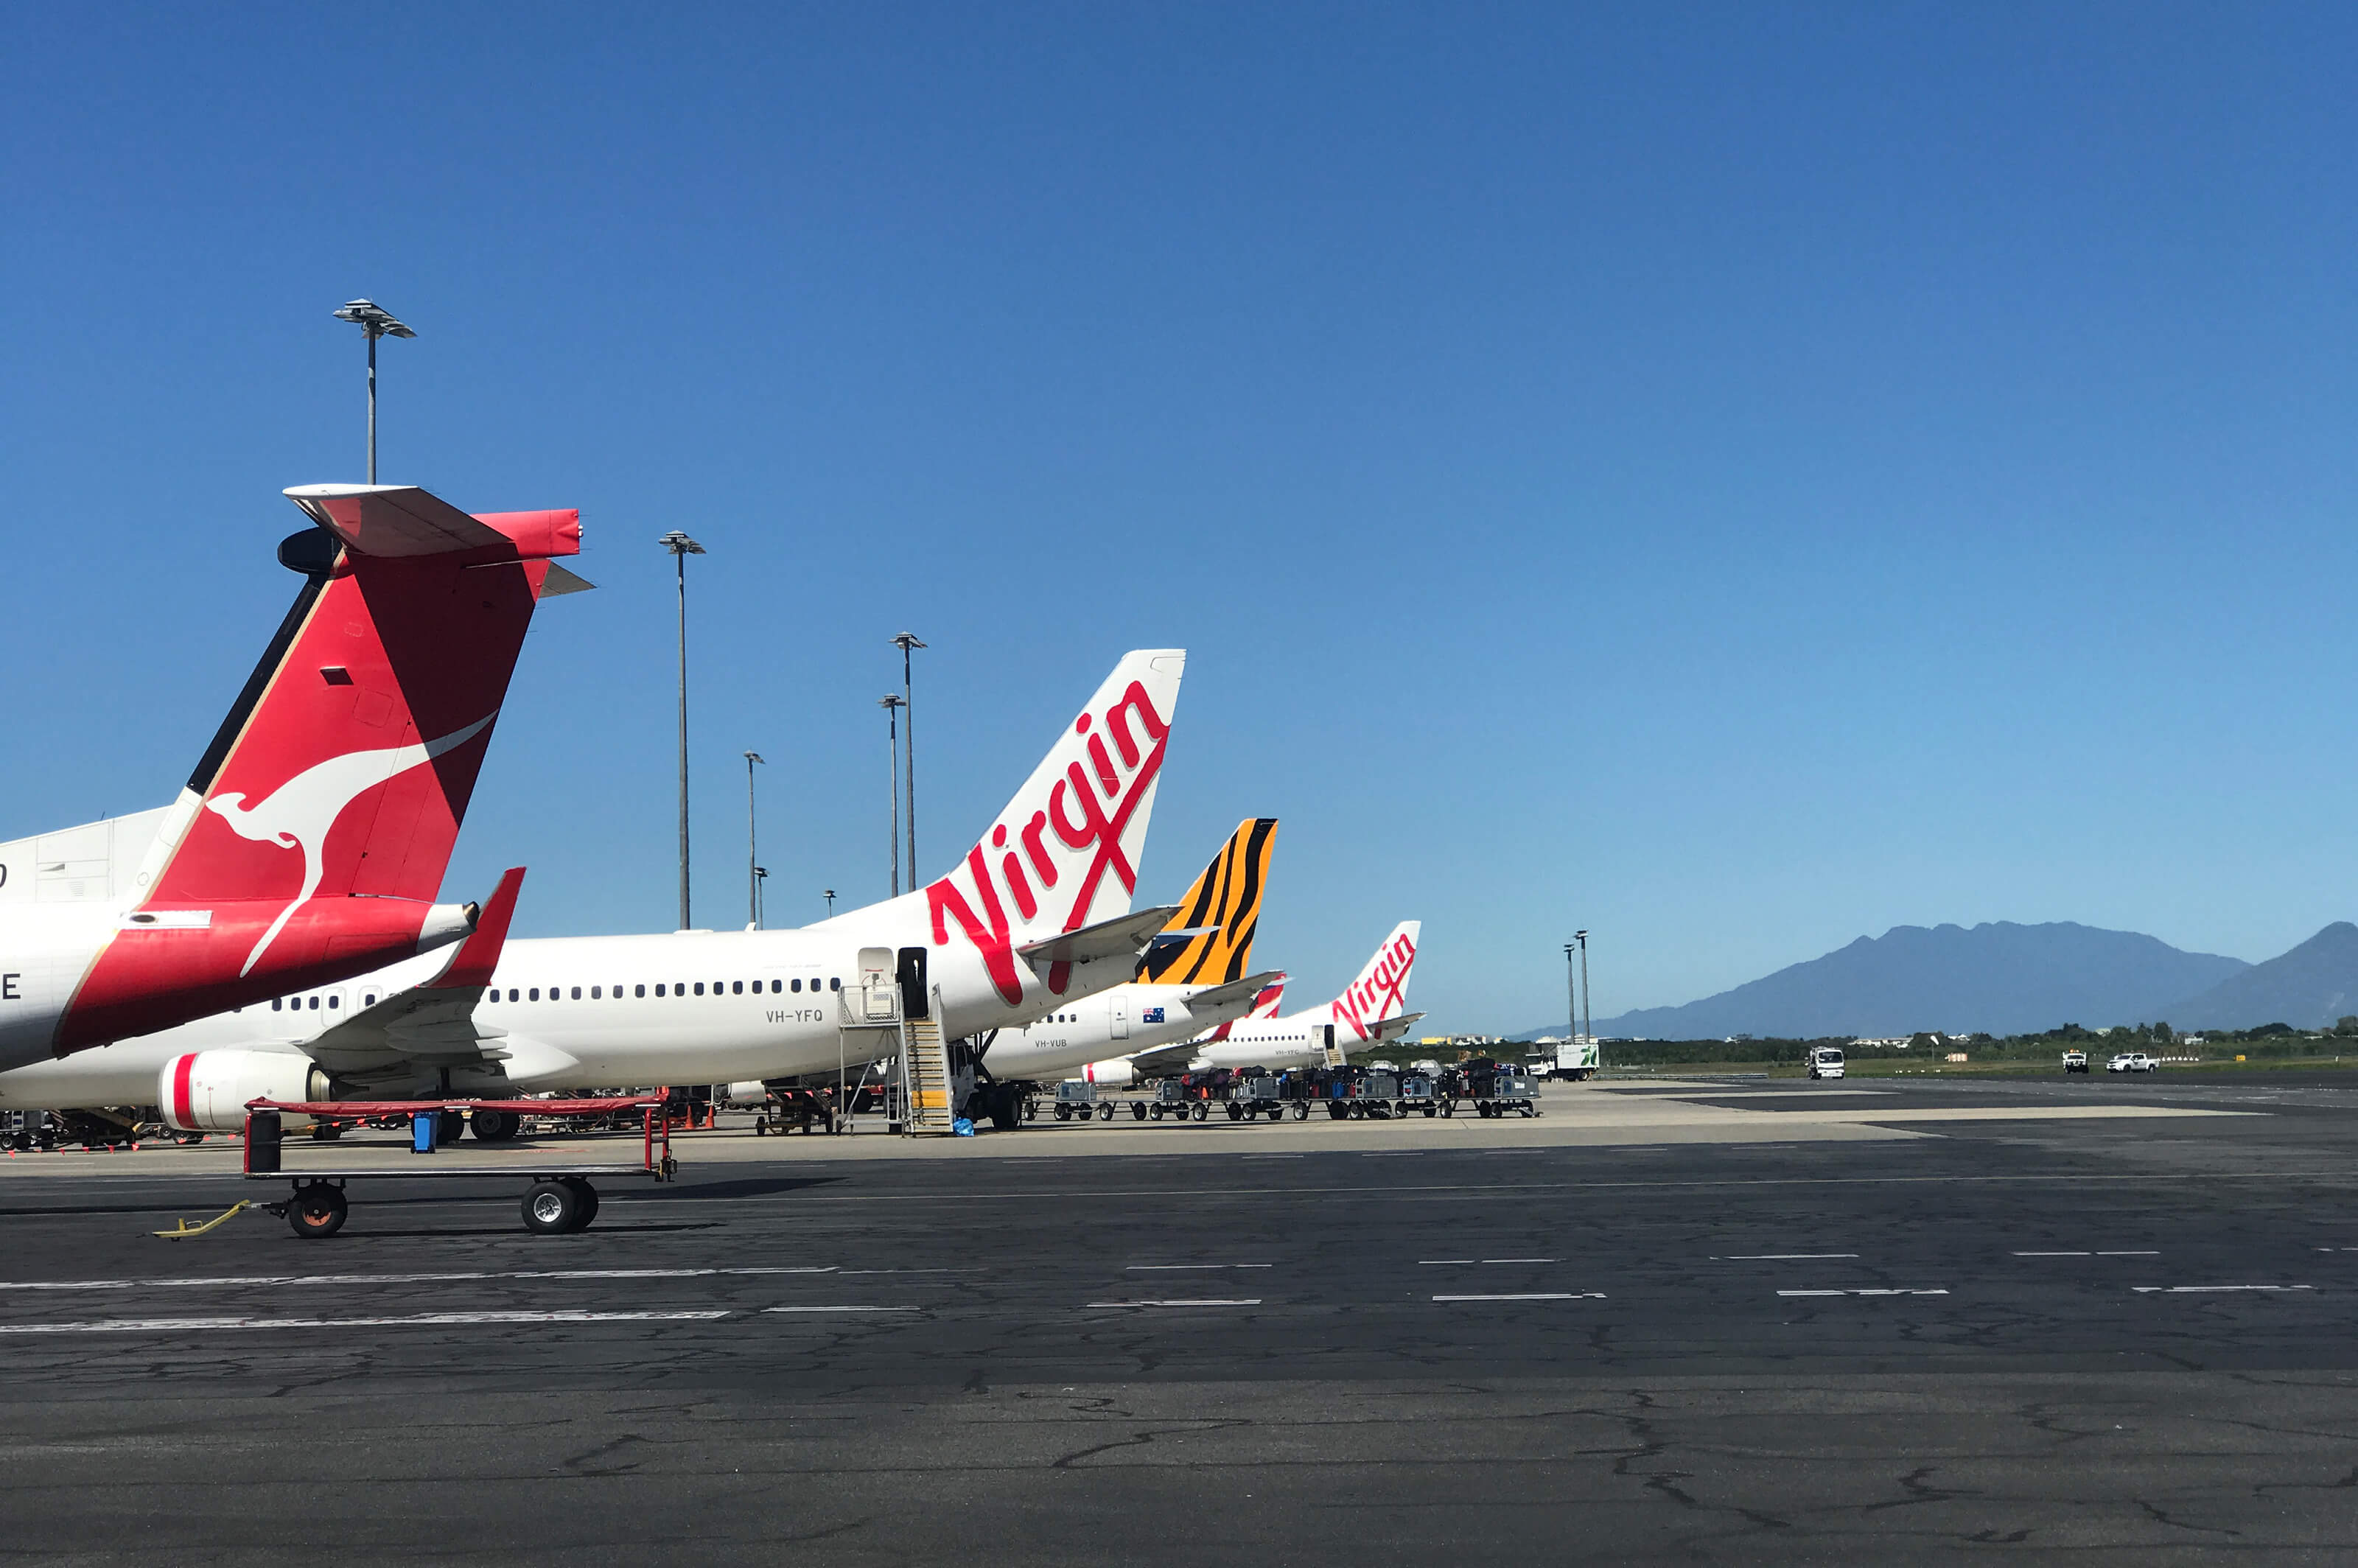 Planes on tarmac at Cairns